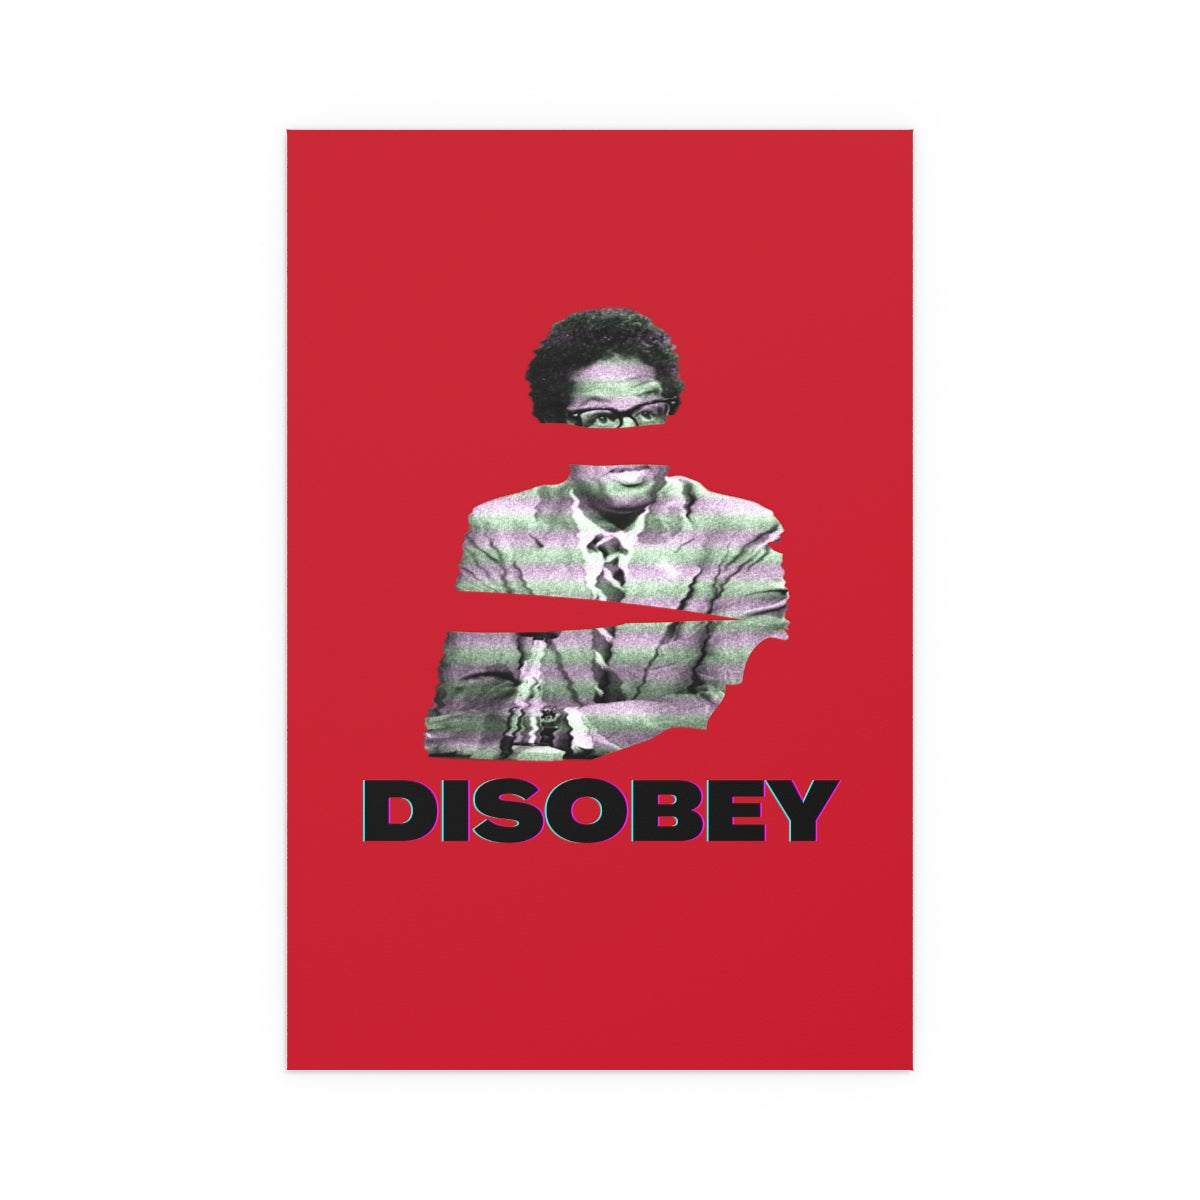 "DISOBEY" Sowell Poster